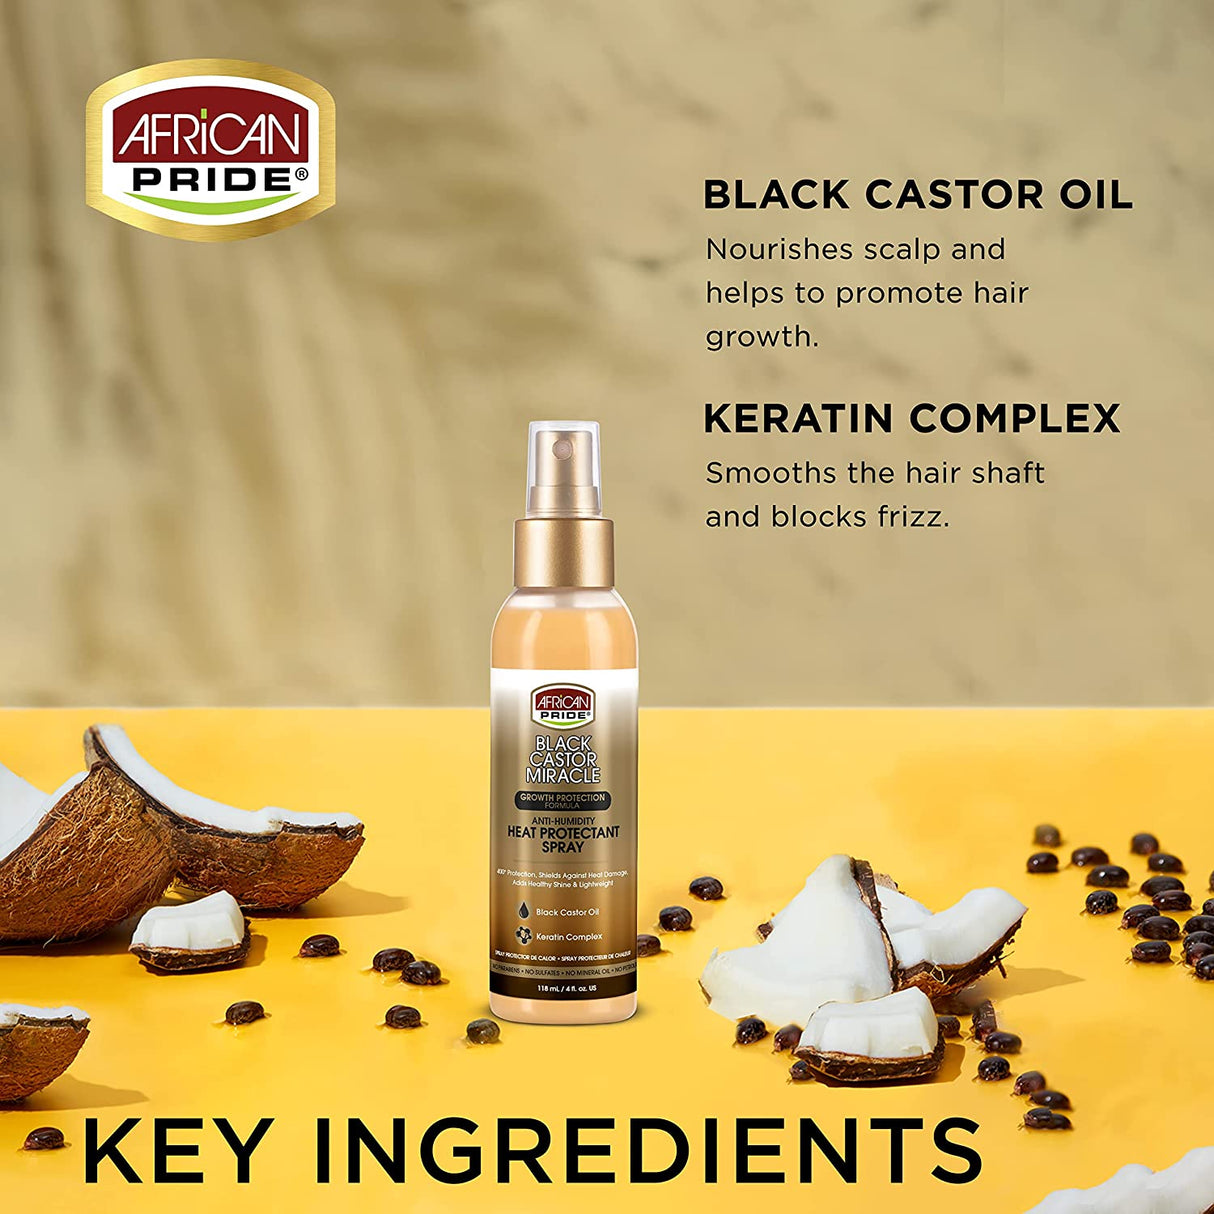 African Pride Black Castor Miracle Anti-Humidity Heat Protectant Spray Find Your New Look Today!